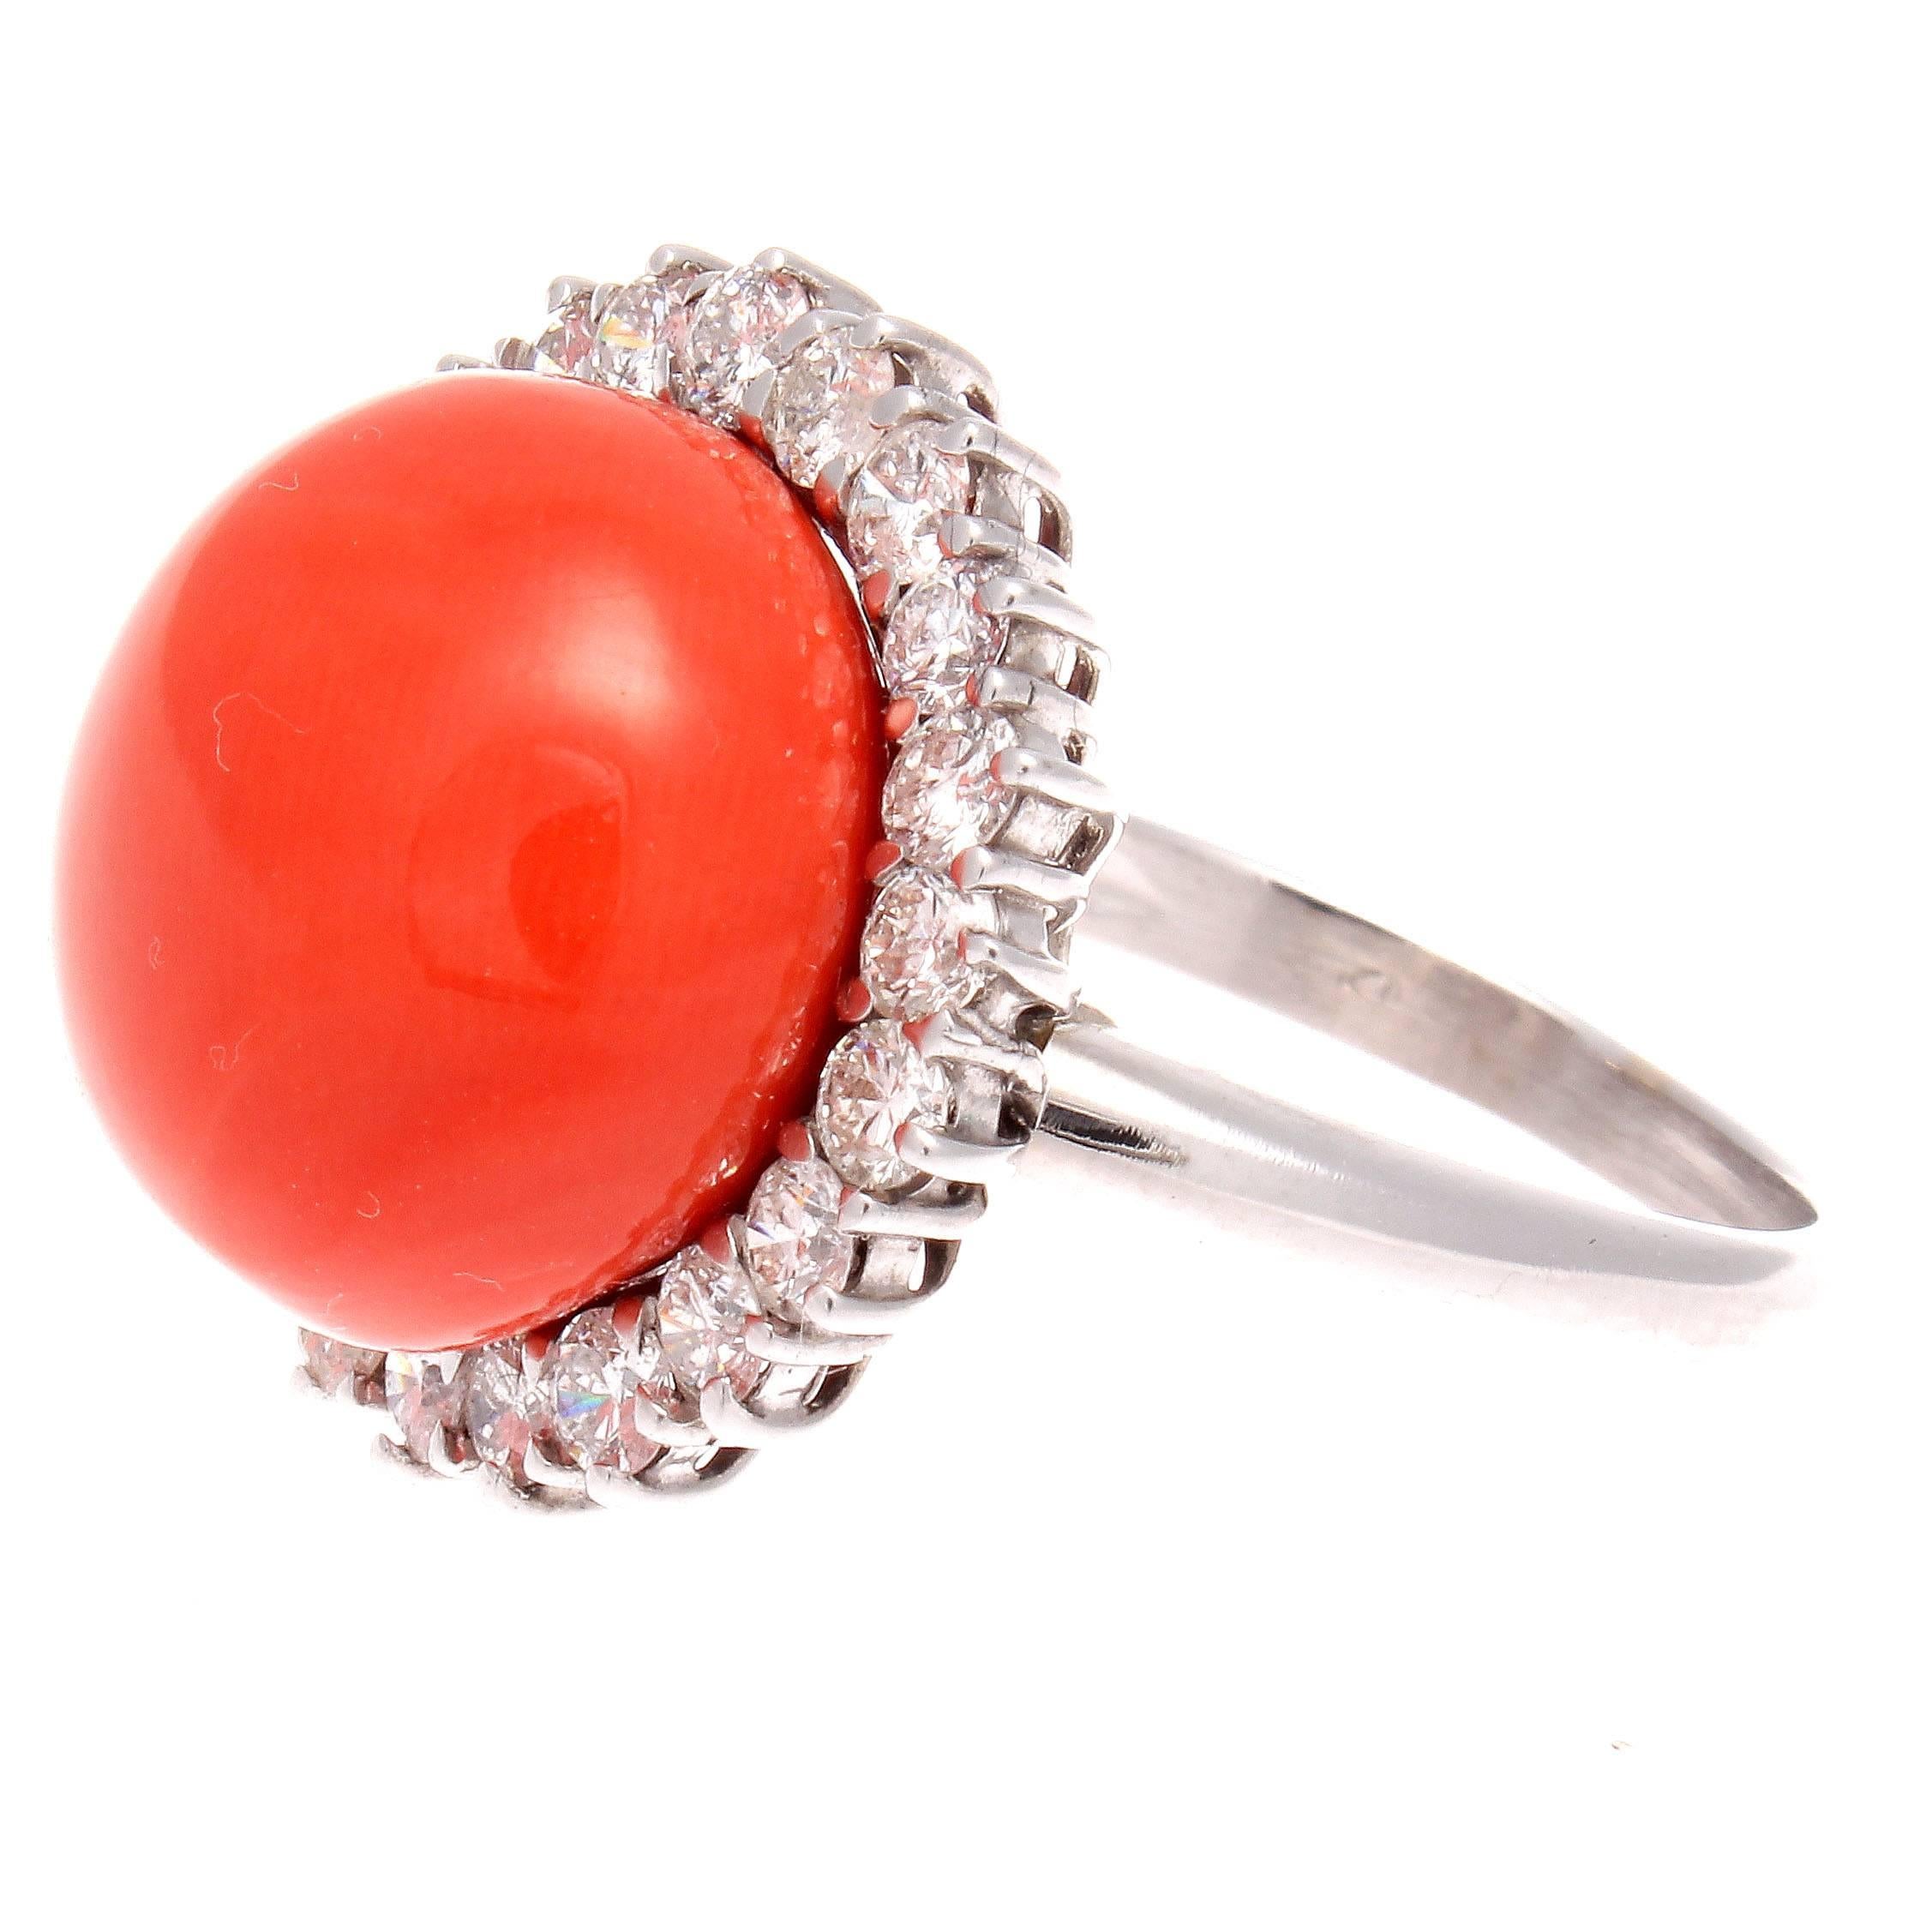 A colorful creation of natural beauty. Featuring a cabochon cut reddish-orange coral elegantly surrounded by a halo of near colorless diamonds. Crafted in 18k white gold.

Ring size 7 and may be resized to fit.